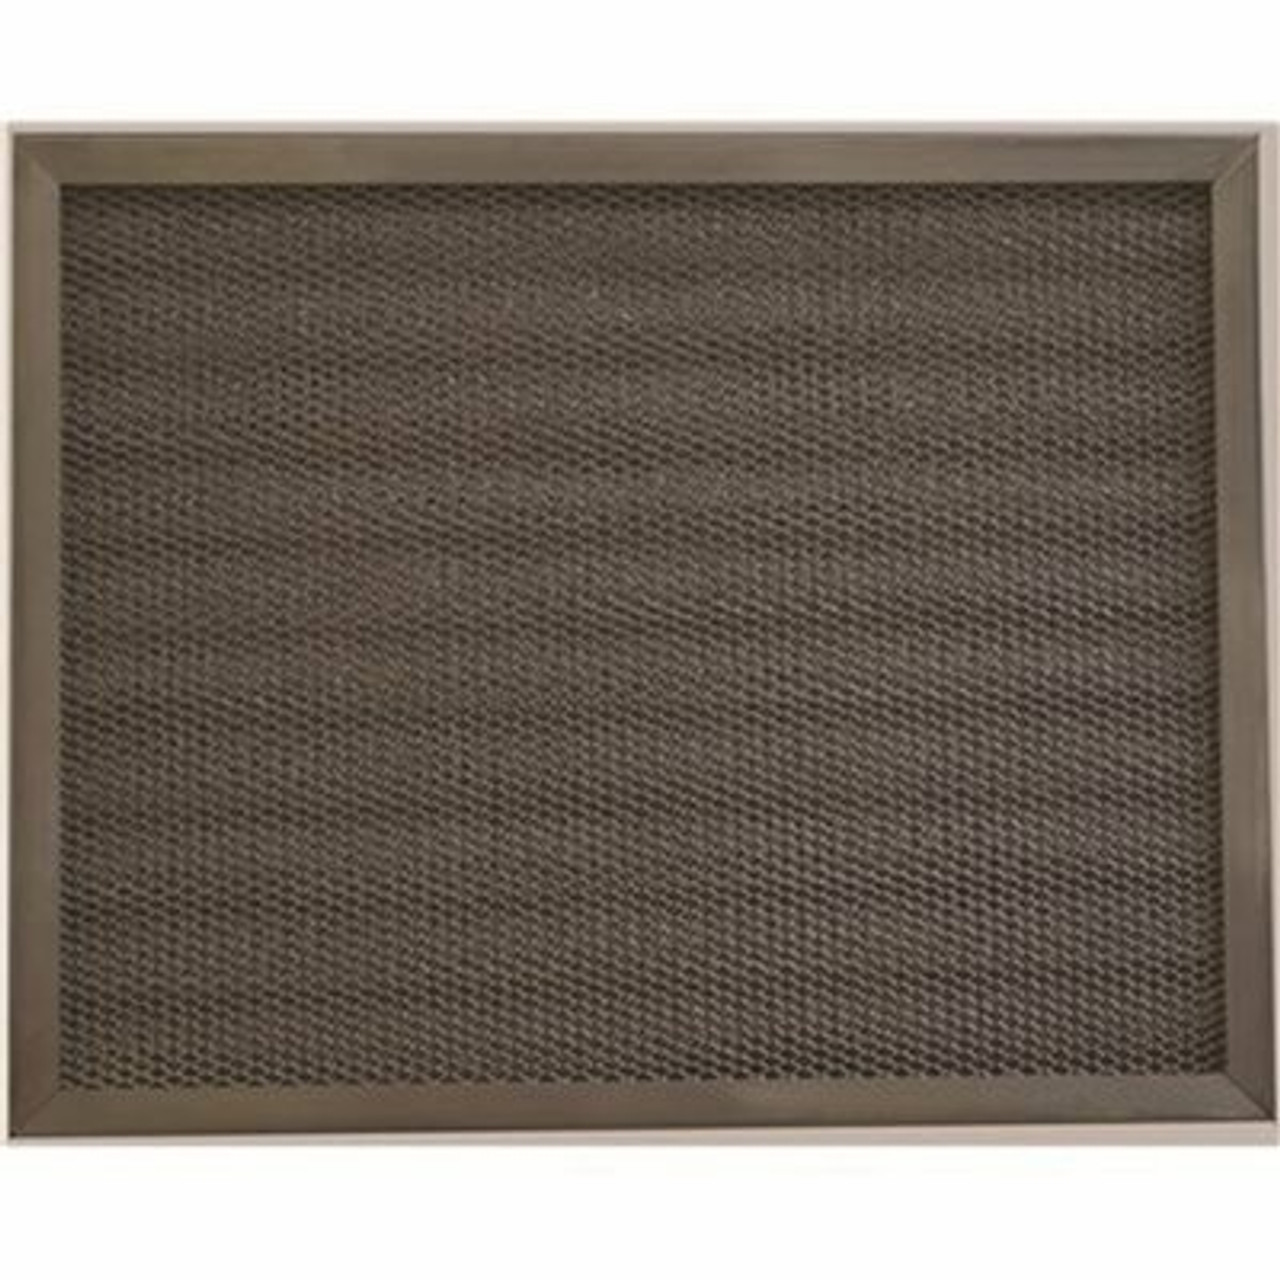 AAF Flanders 15 In. X 20 In. X 2 Washable Kkm MERV 4 Air Filter With Galvanized Frame (Case Of 6)